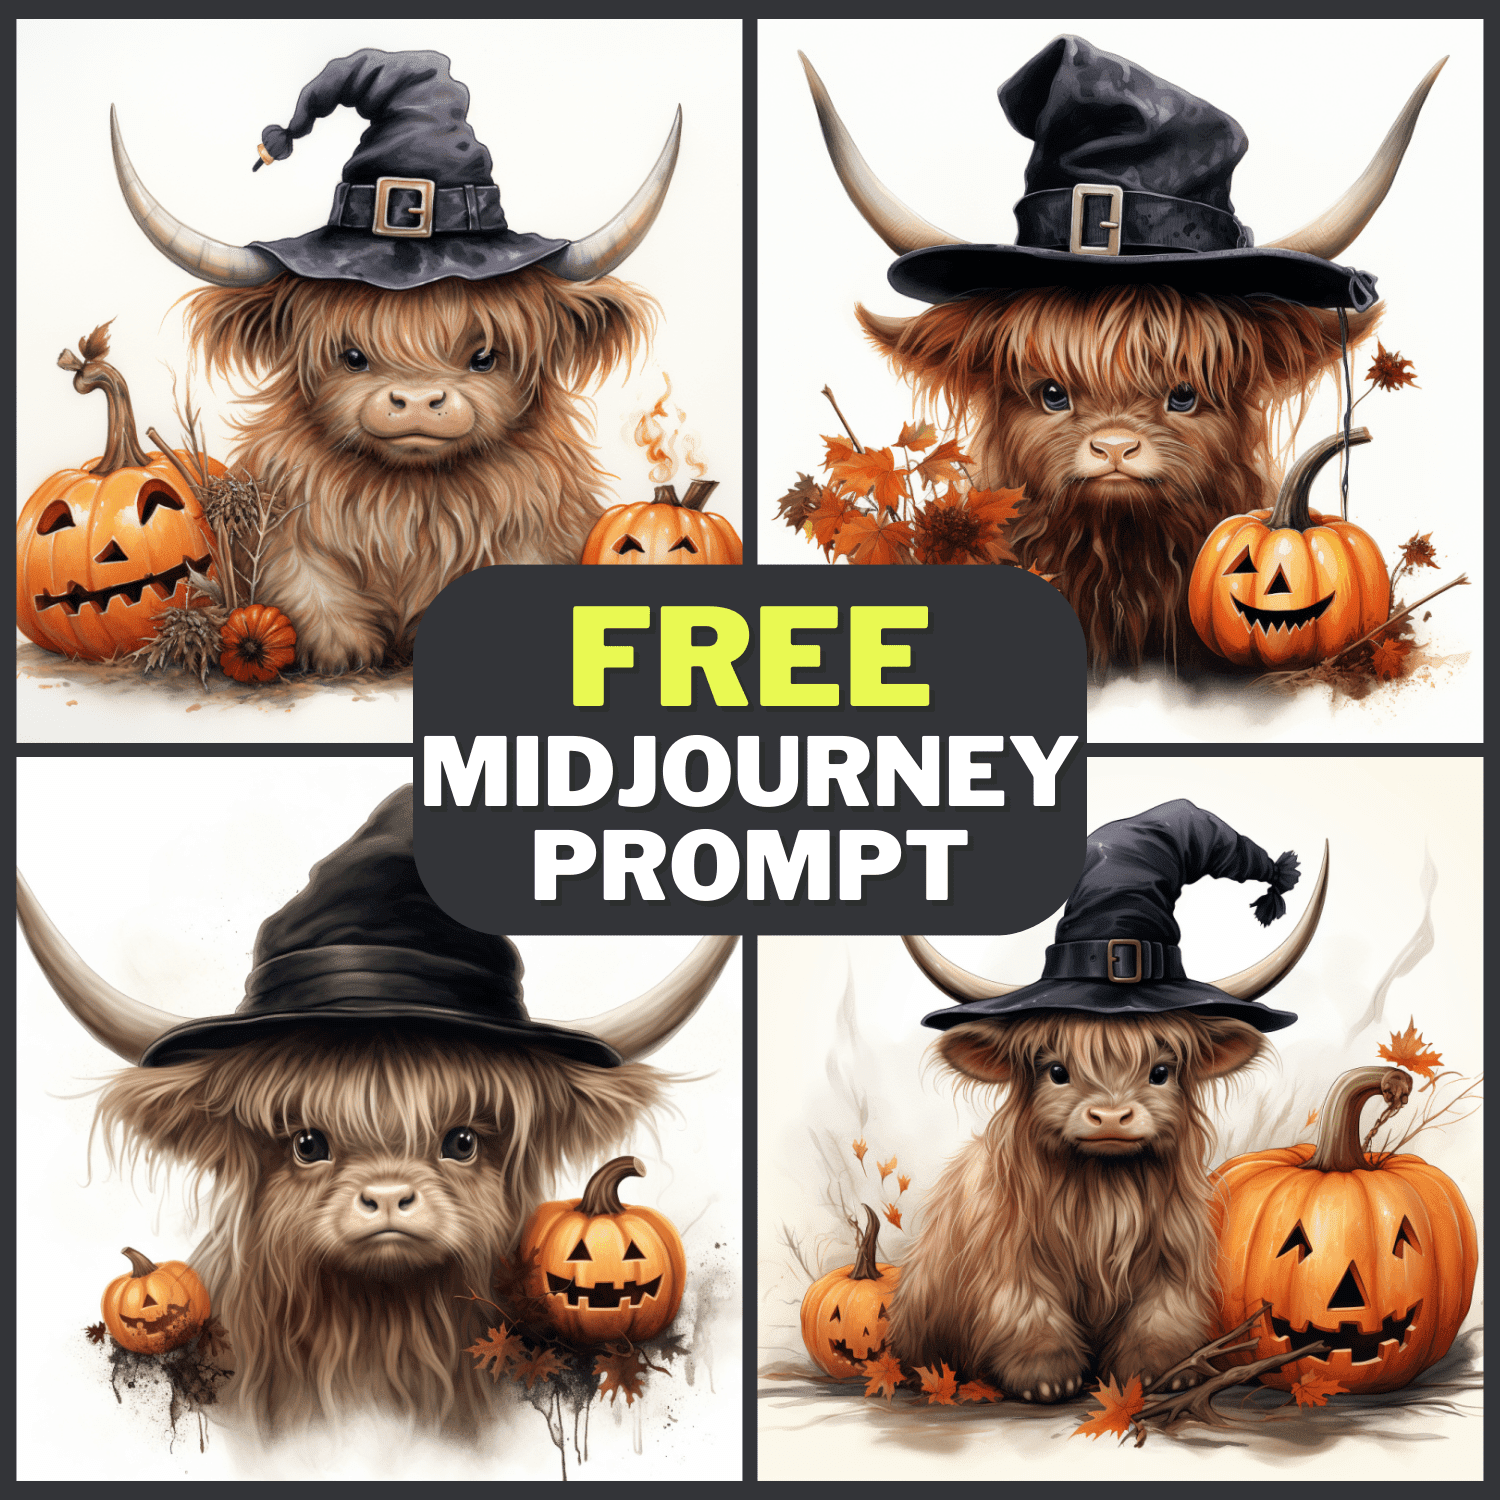 Halloween Baby Highland Cow With Pumpkins Free Midjourney Prompt 1